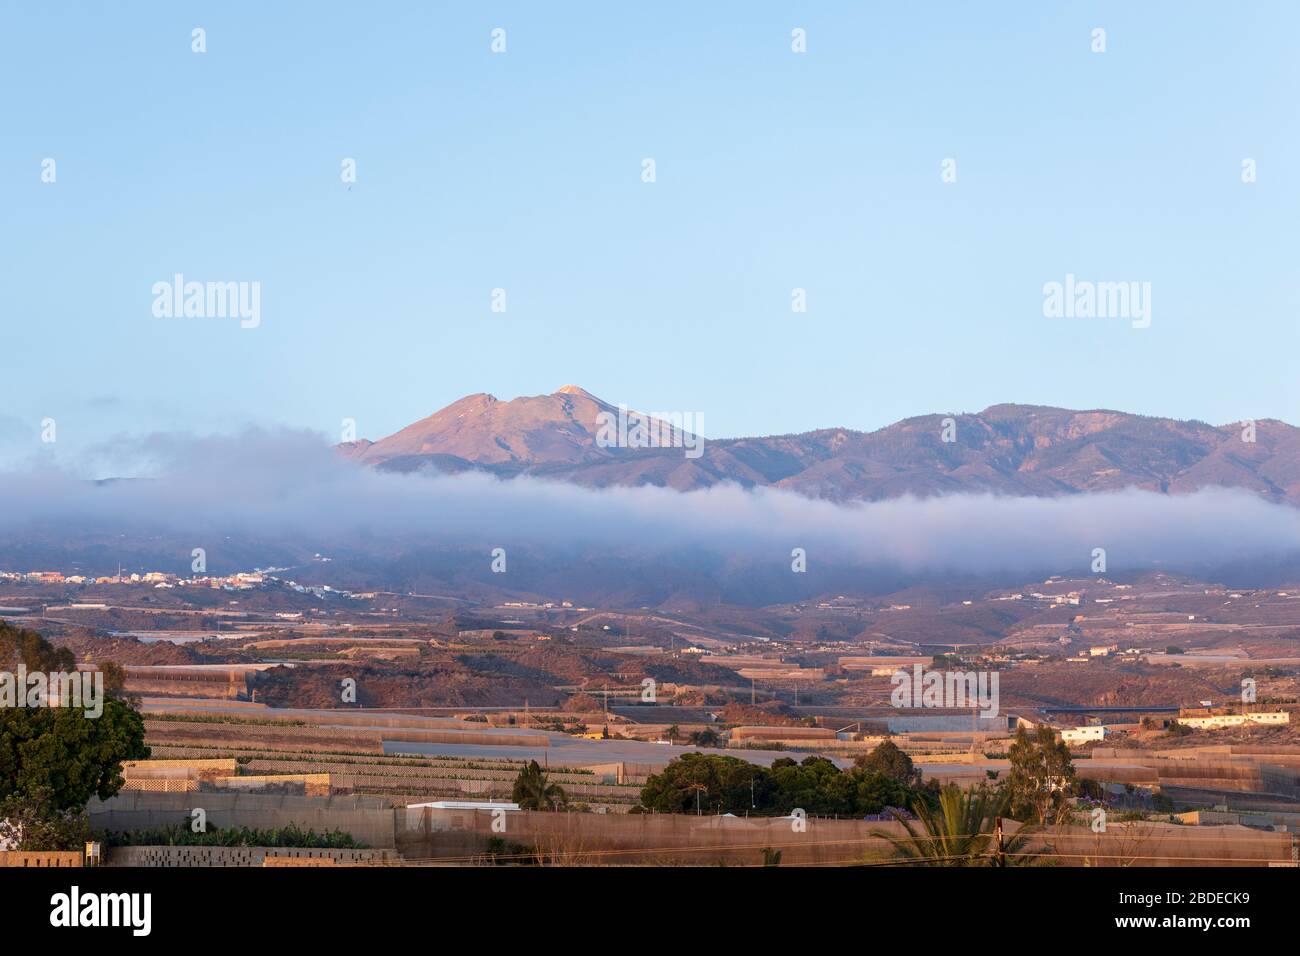 Teide volcano and the Pico Viejo above the cloud, viewed from Playa San Juan, Tenerife, Canary Islands, Spain Stock Photo